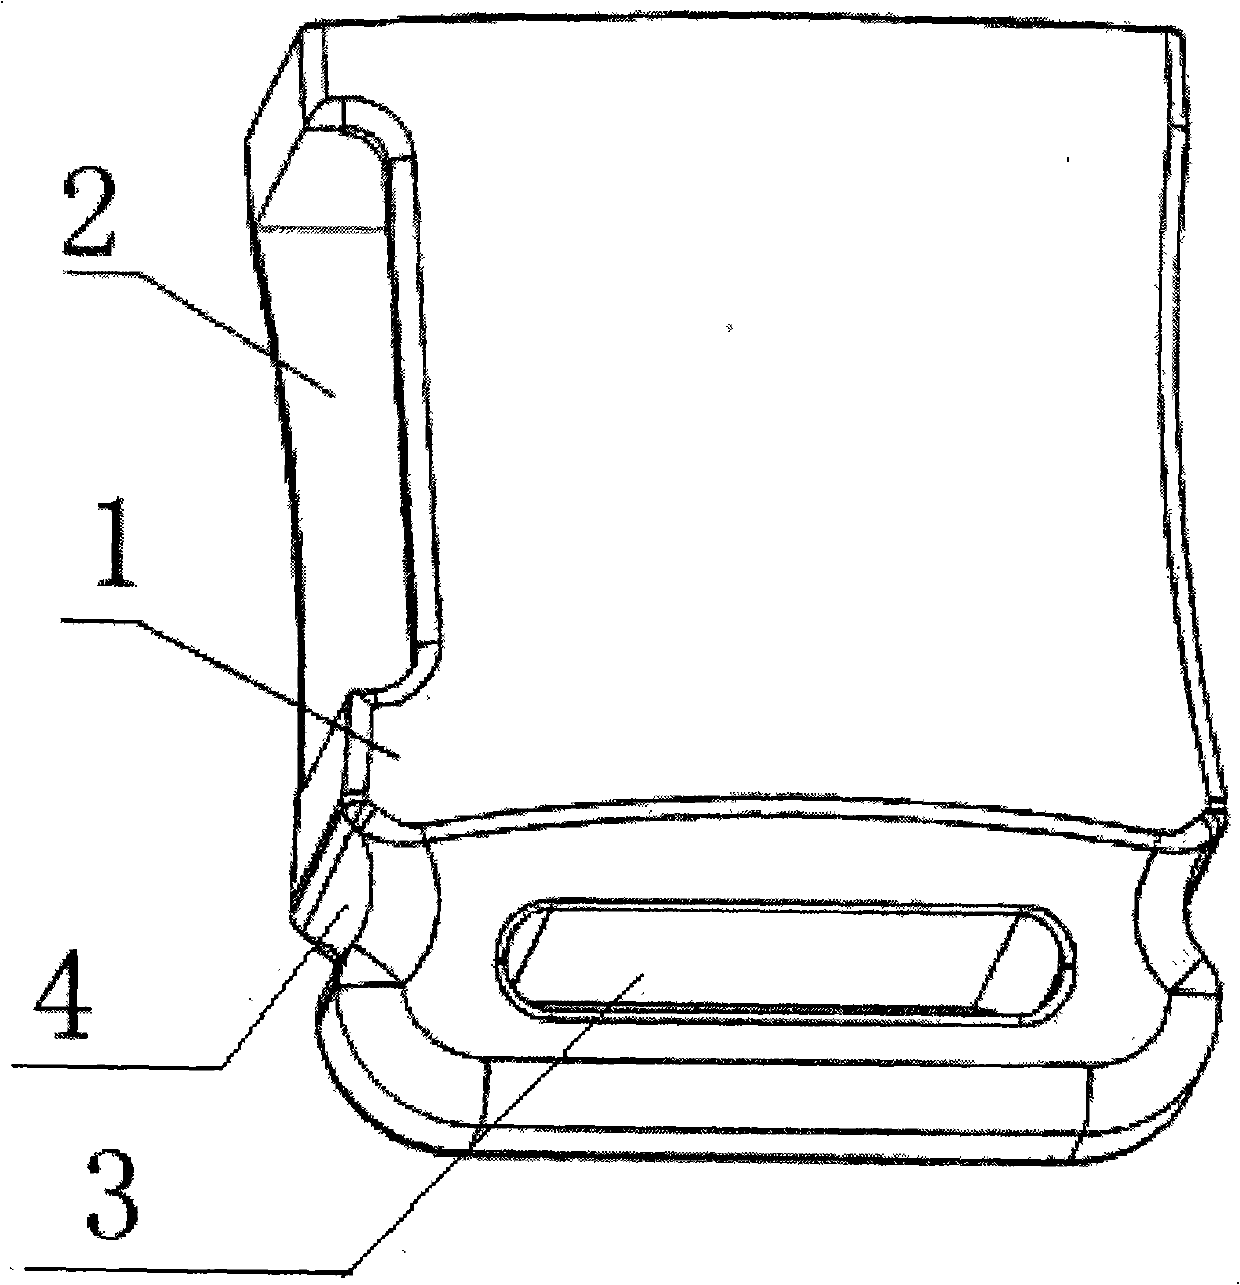 A shell structure of fastener used for safety seat of children